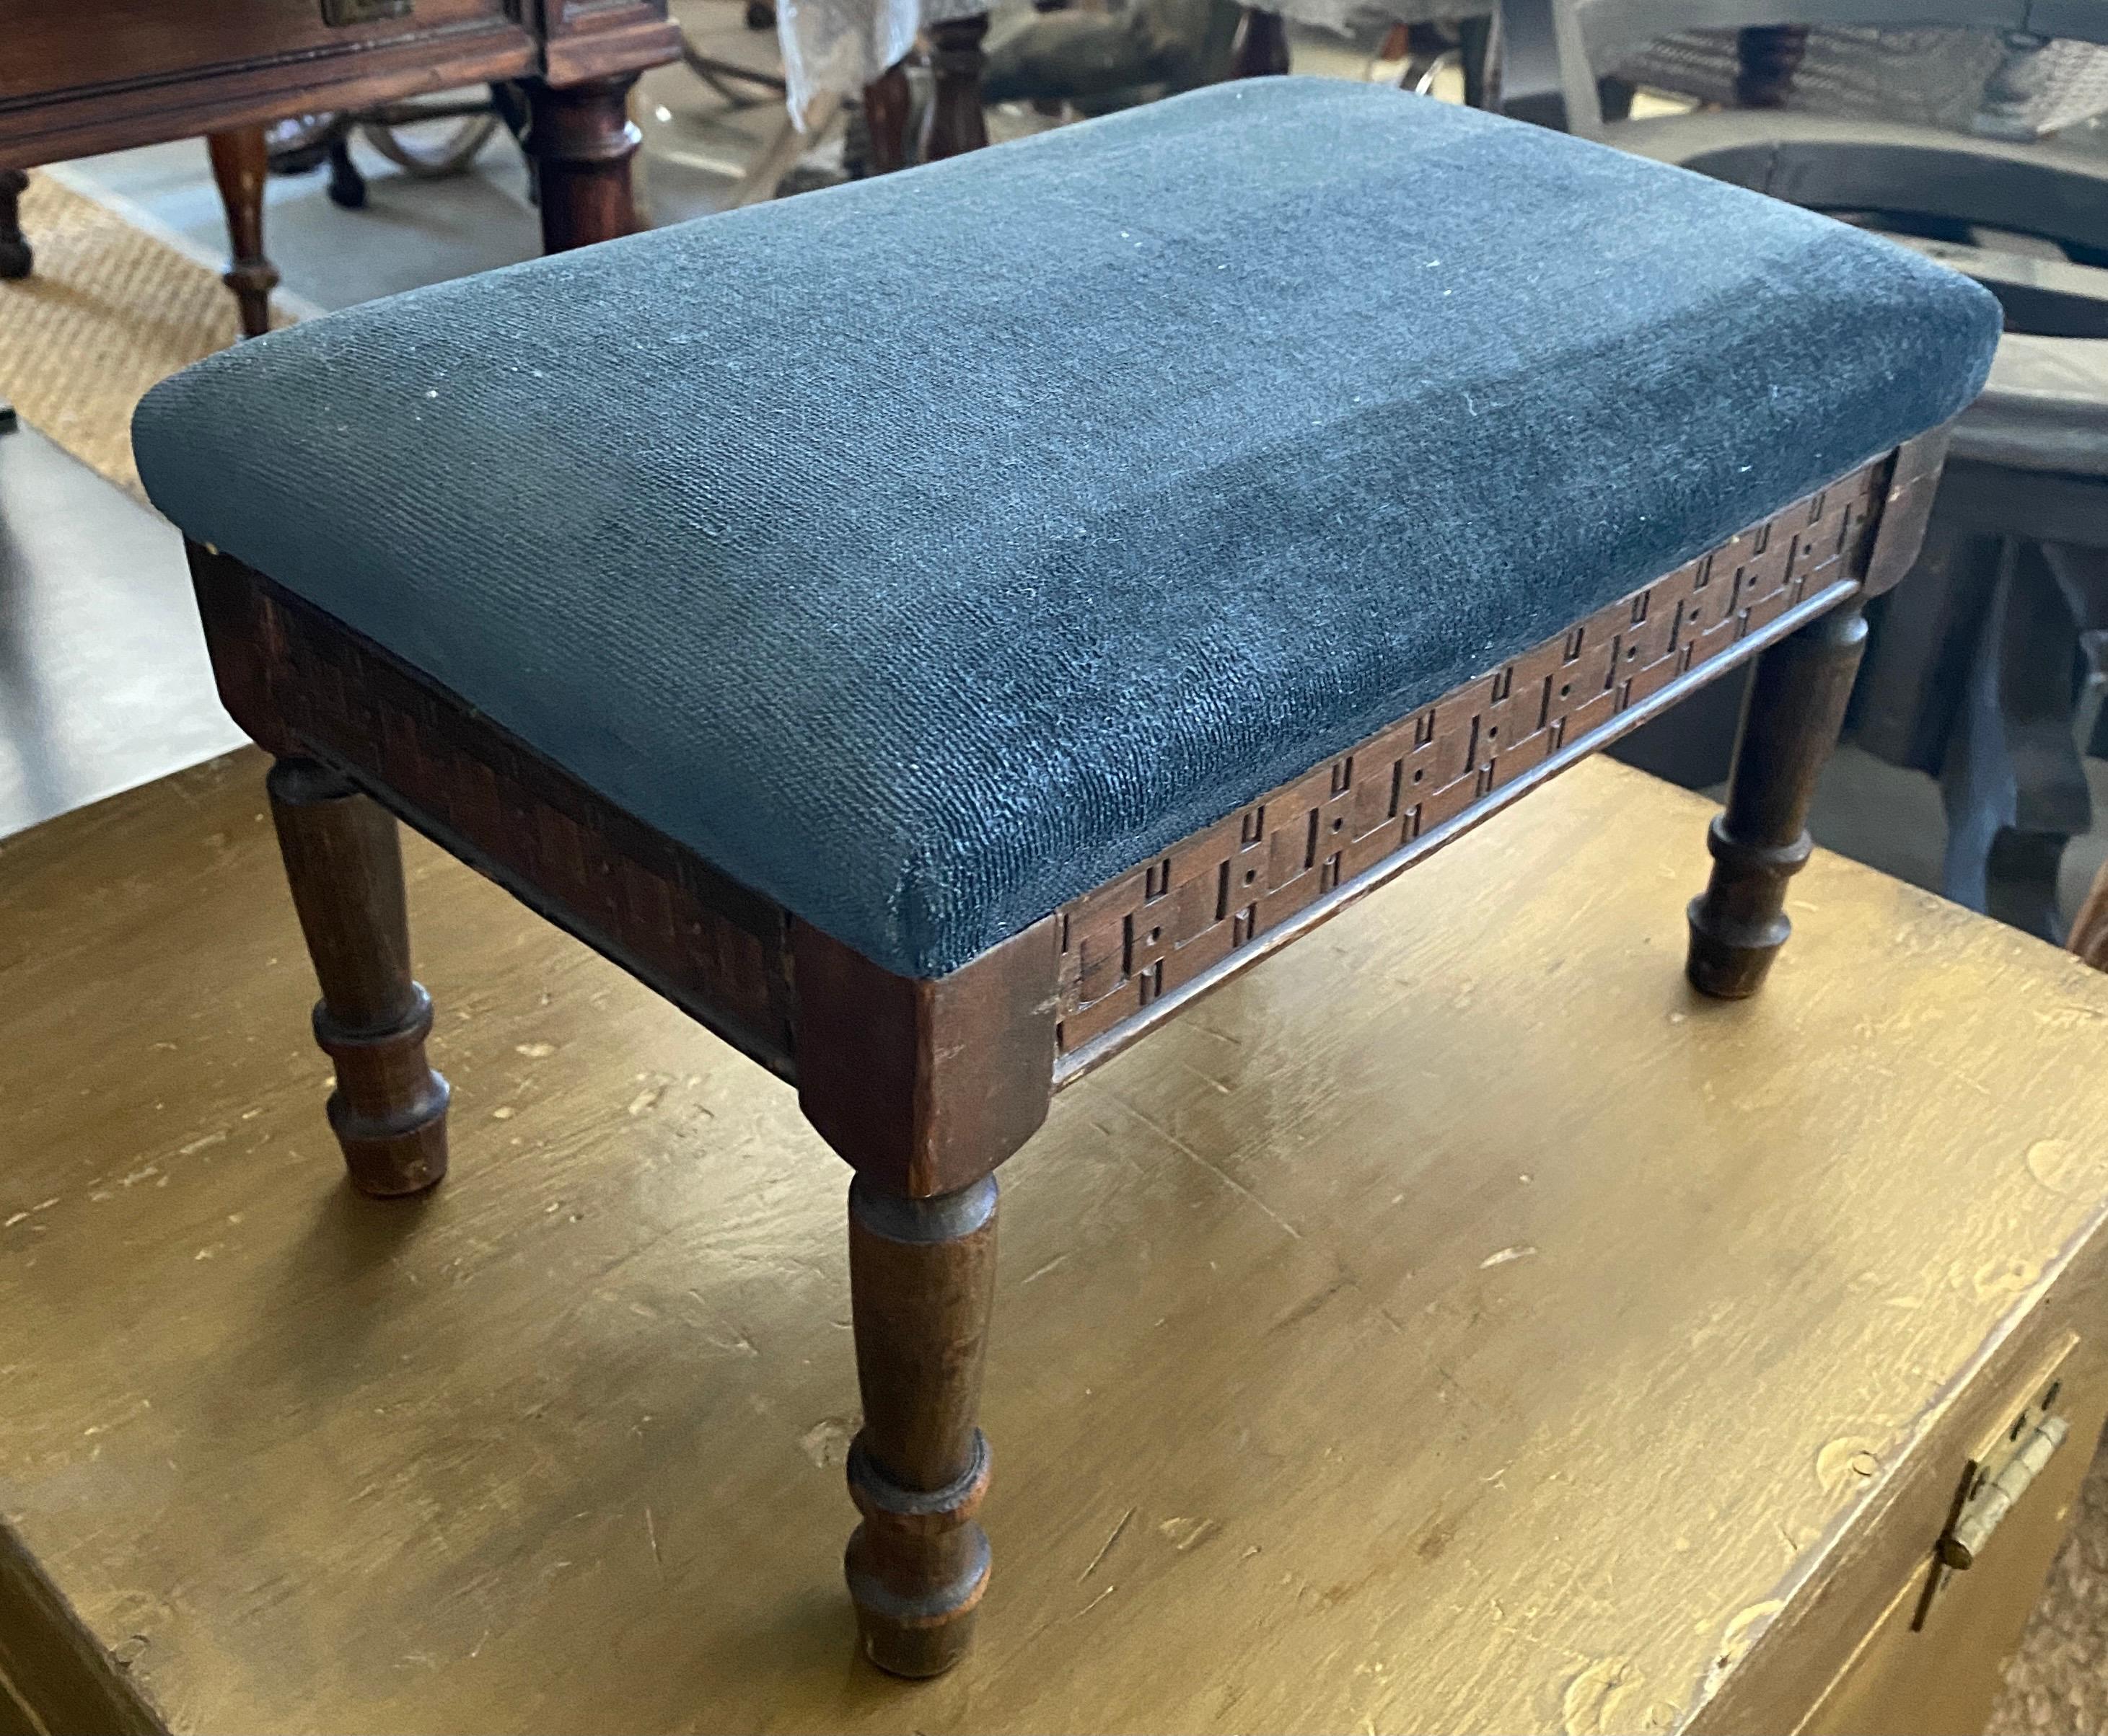 A very charming small antique Louis XV style low blue upholstered carved wood tabouret or foot stool. The stool is covered in a blue canvas like fabric with a velvet look.